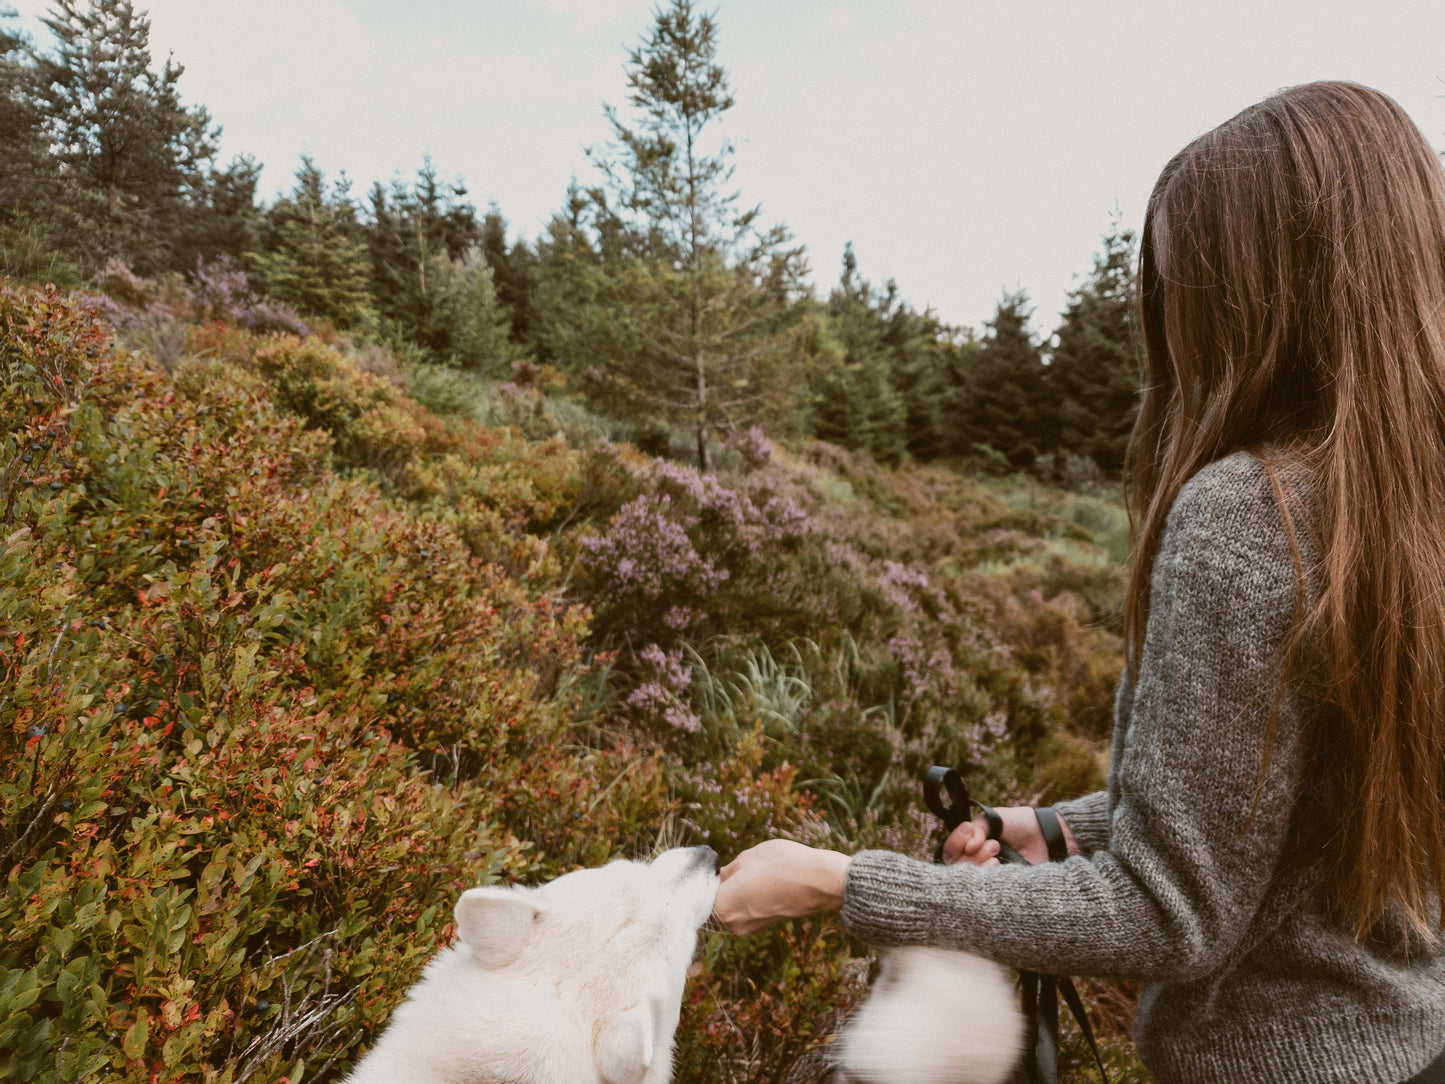 Designer Ulven feeding her husky dog blueberries, surrounded by blueberry bushes, wearing the grey Wullpullover sweater handknit in Pommernglück from Calling Sheep.